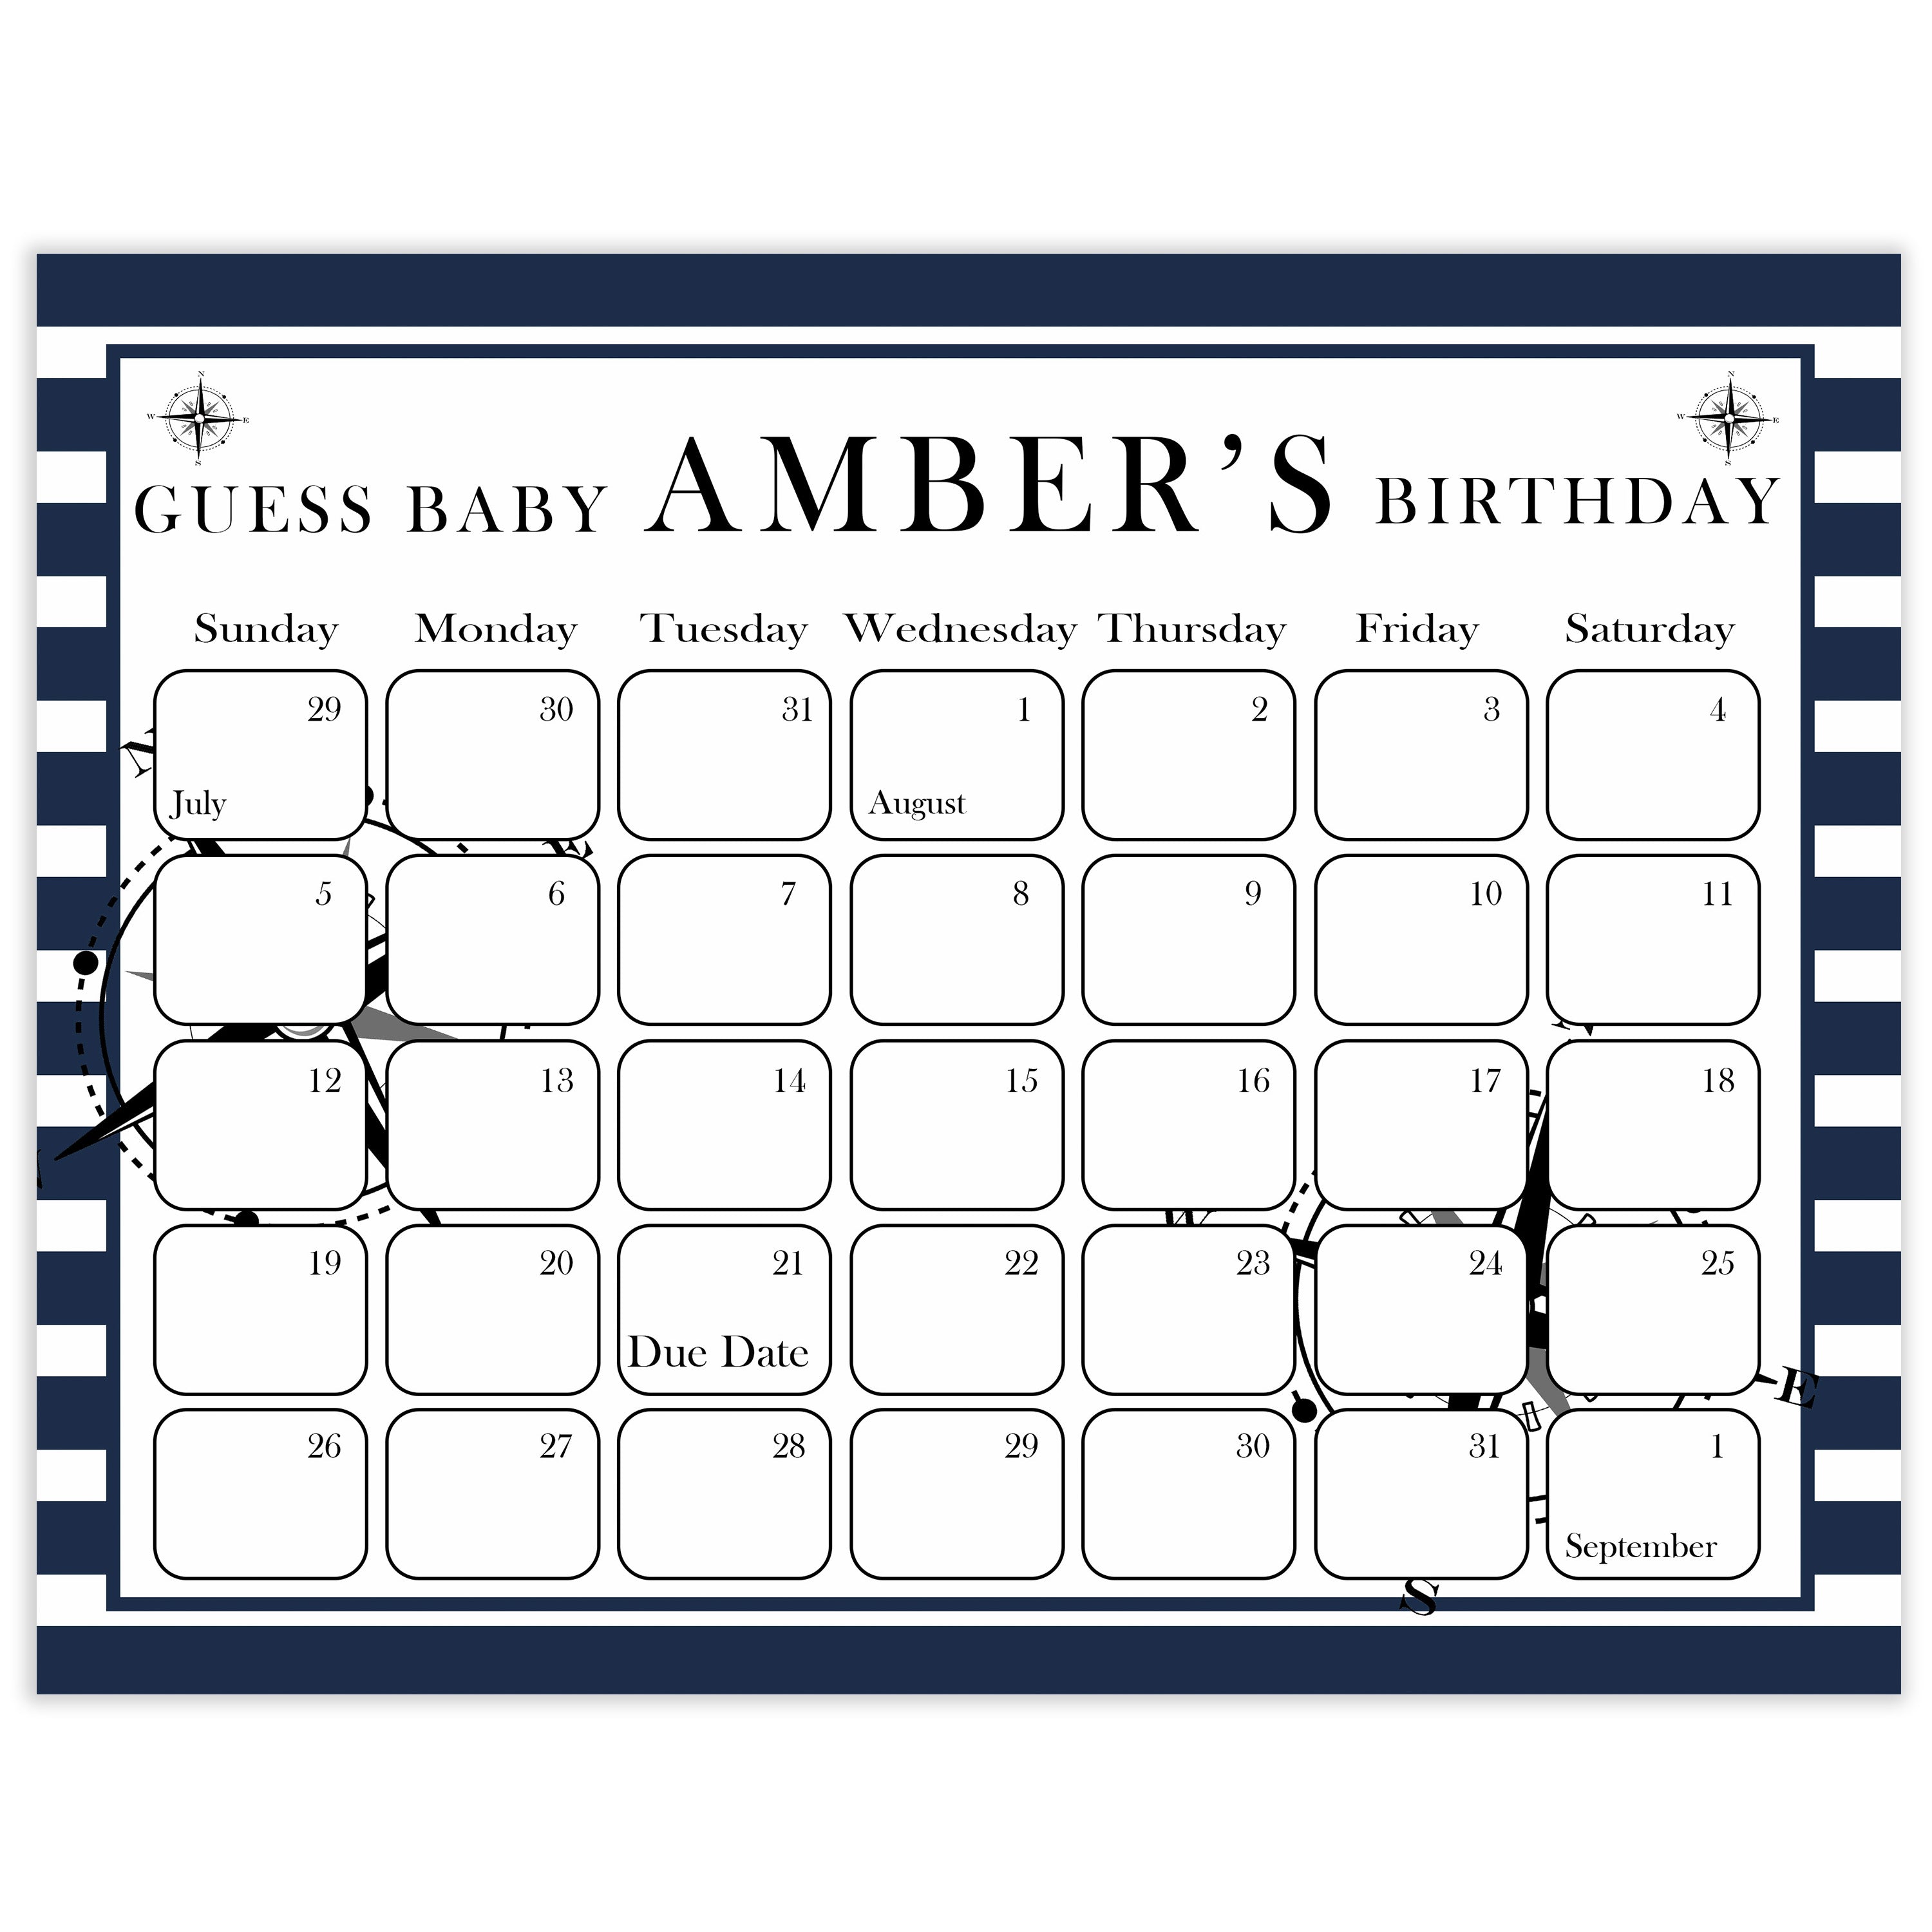 guess the baby birthday game, baby birthday predictions game, printable baby games, nautical baby shower games, nautical baby games